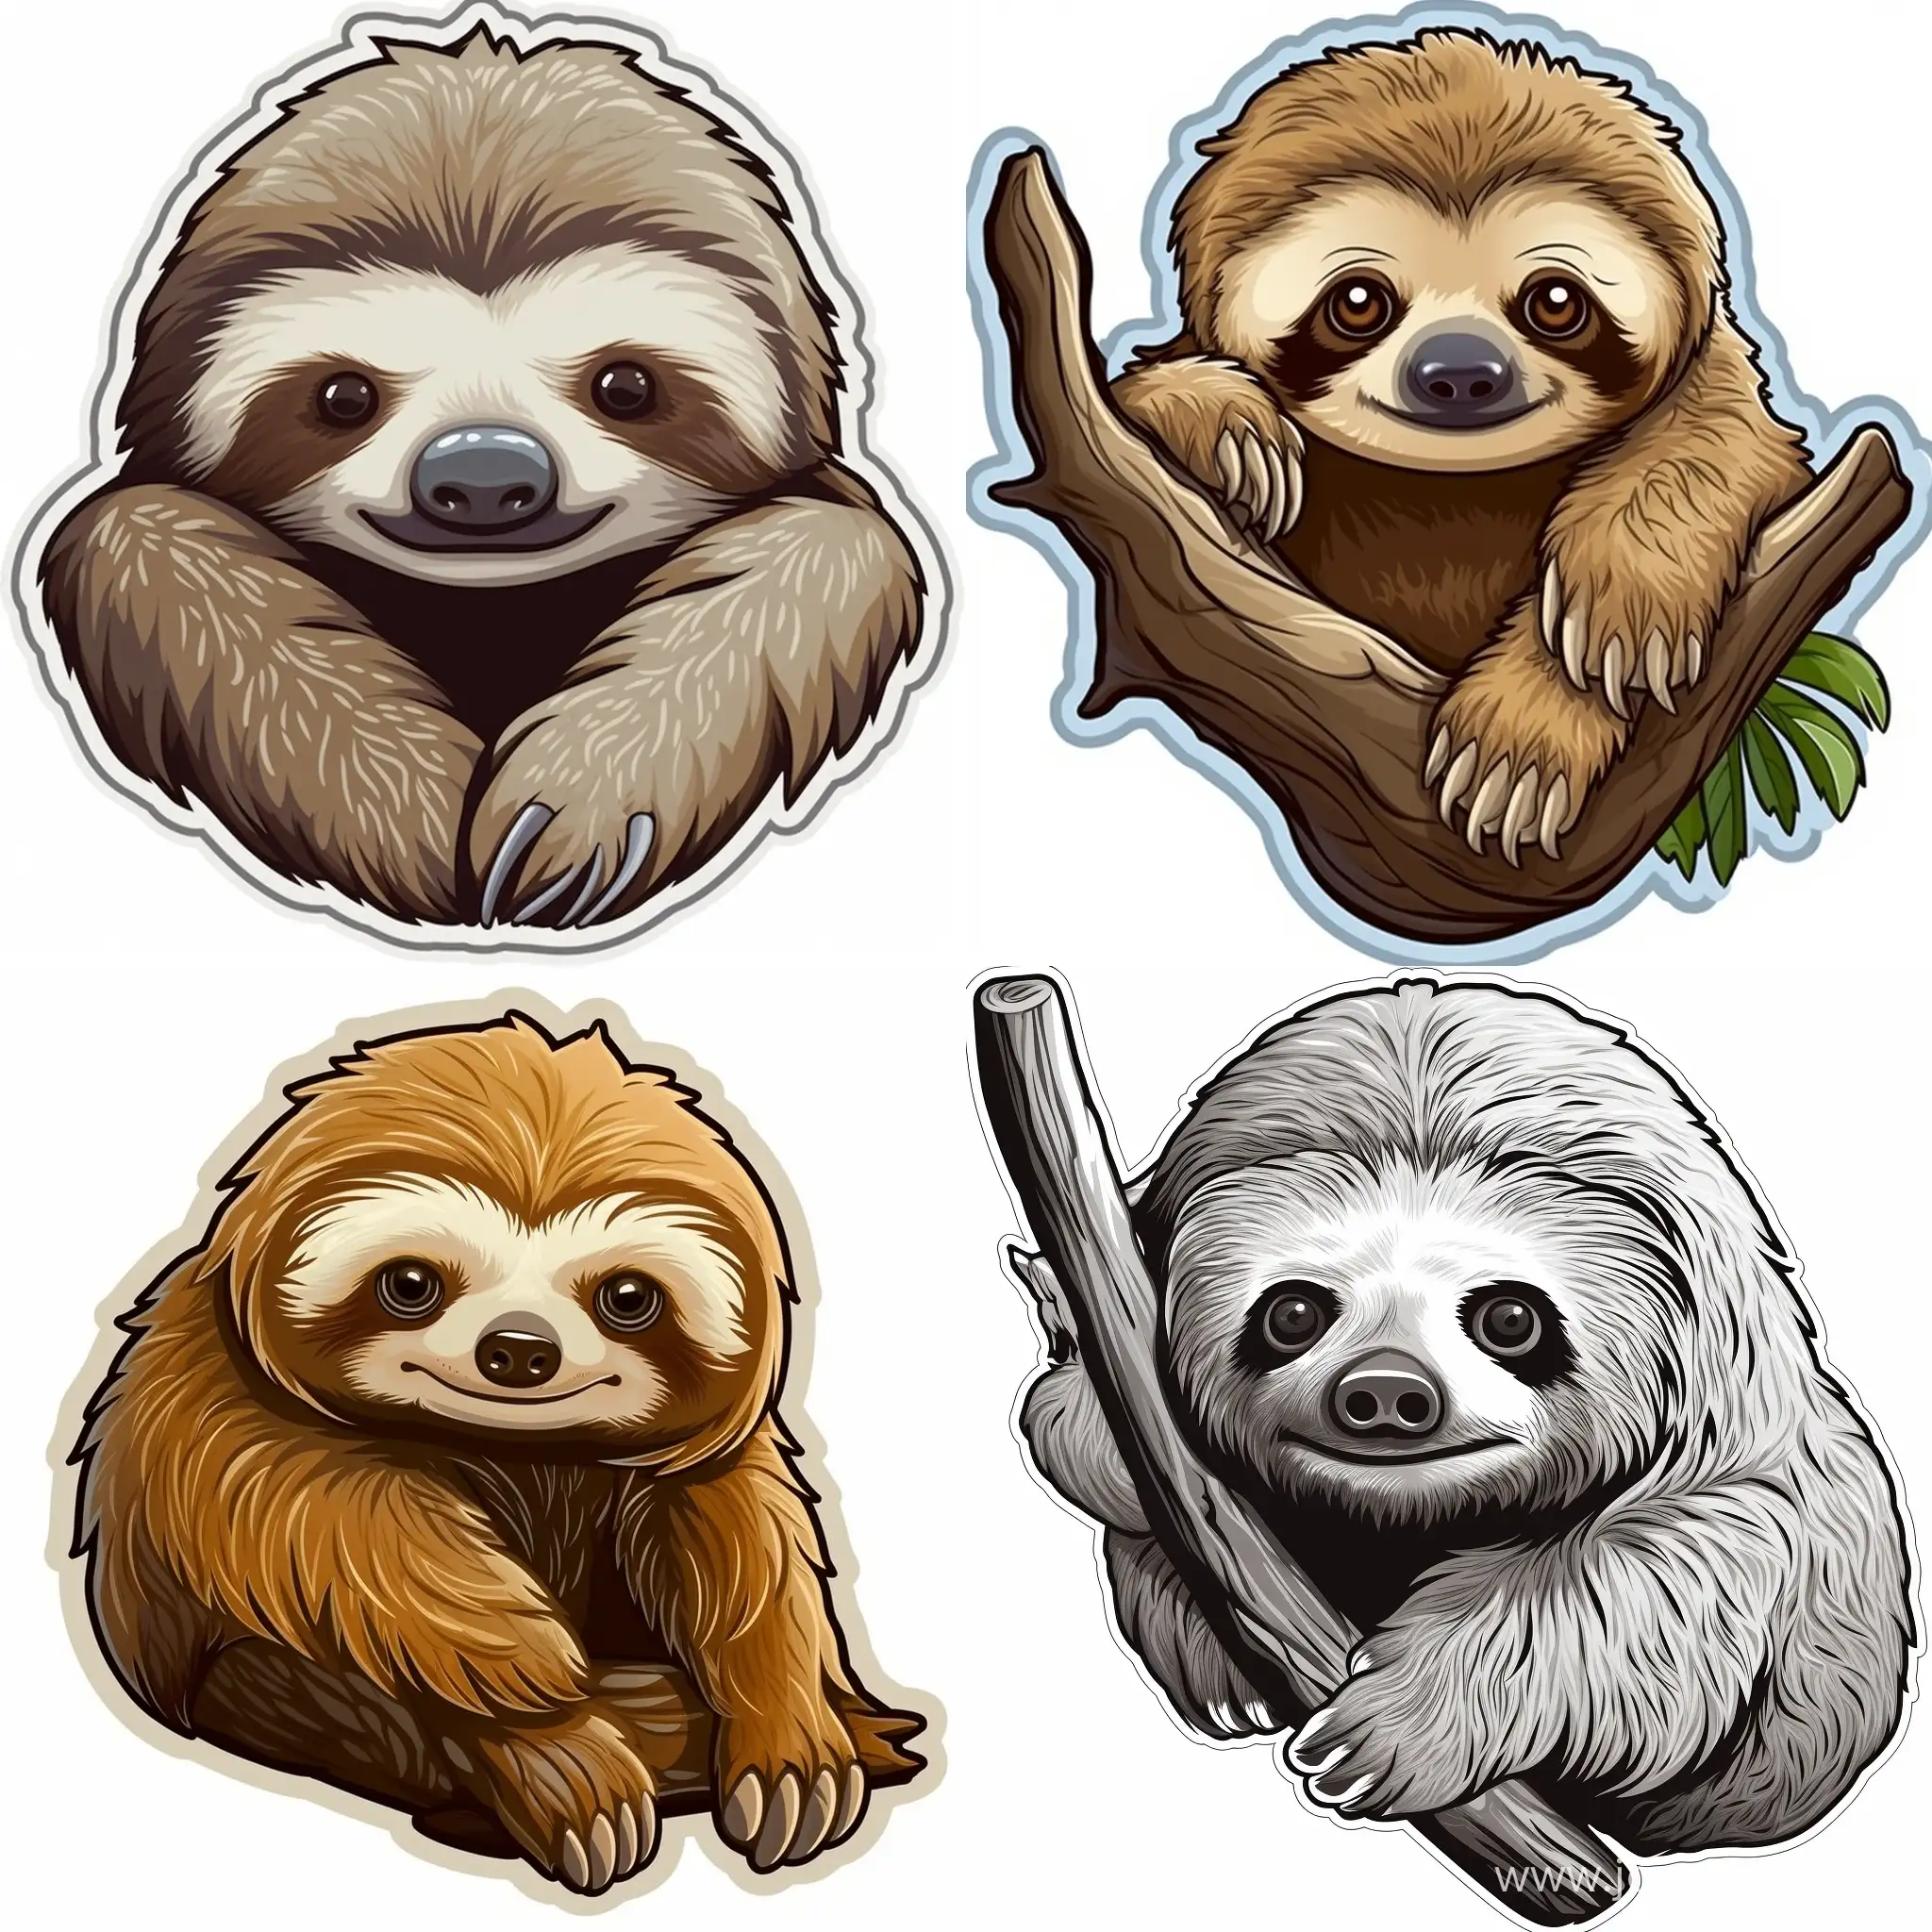 Adorable-Vector-Sticker-Design-of-a-Funny-WhiteOutlined-Sloth